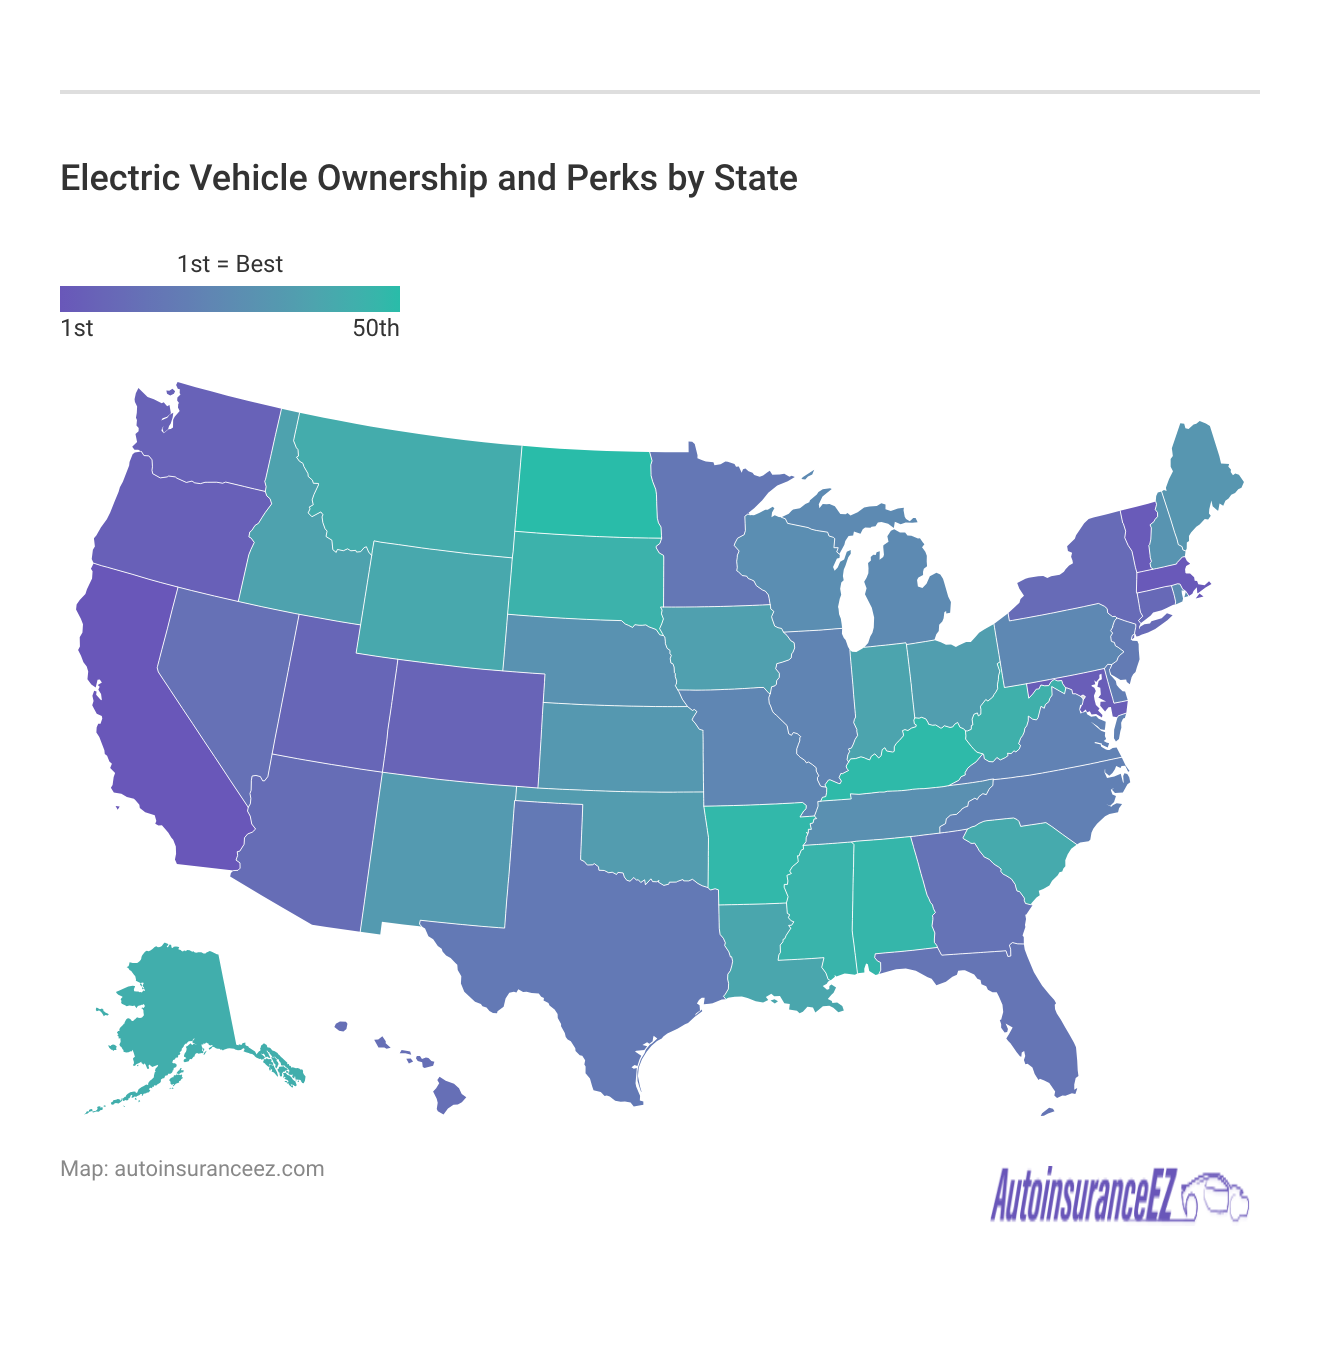 <h3>Electric Vehicle Ownership and Perks by State</h3>